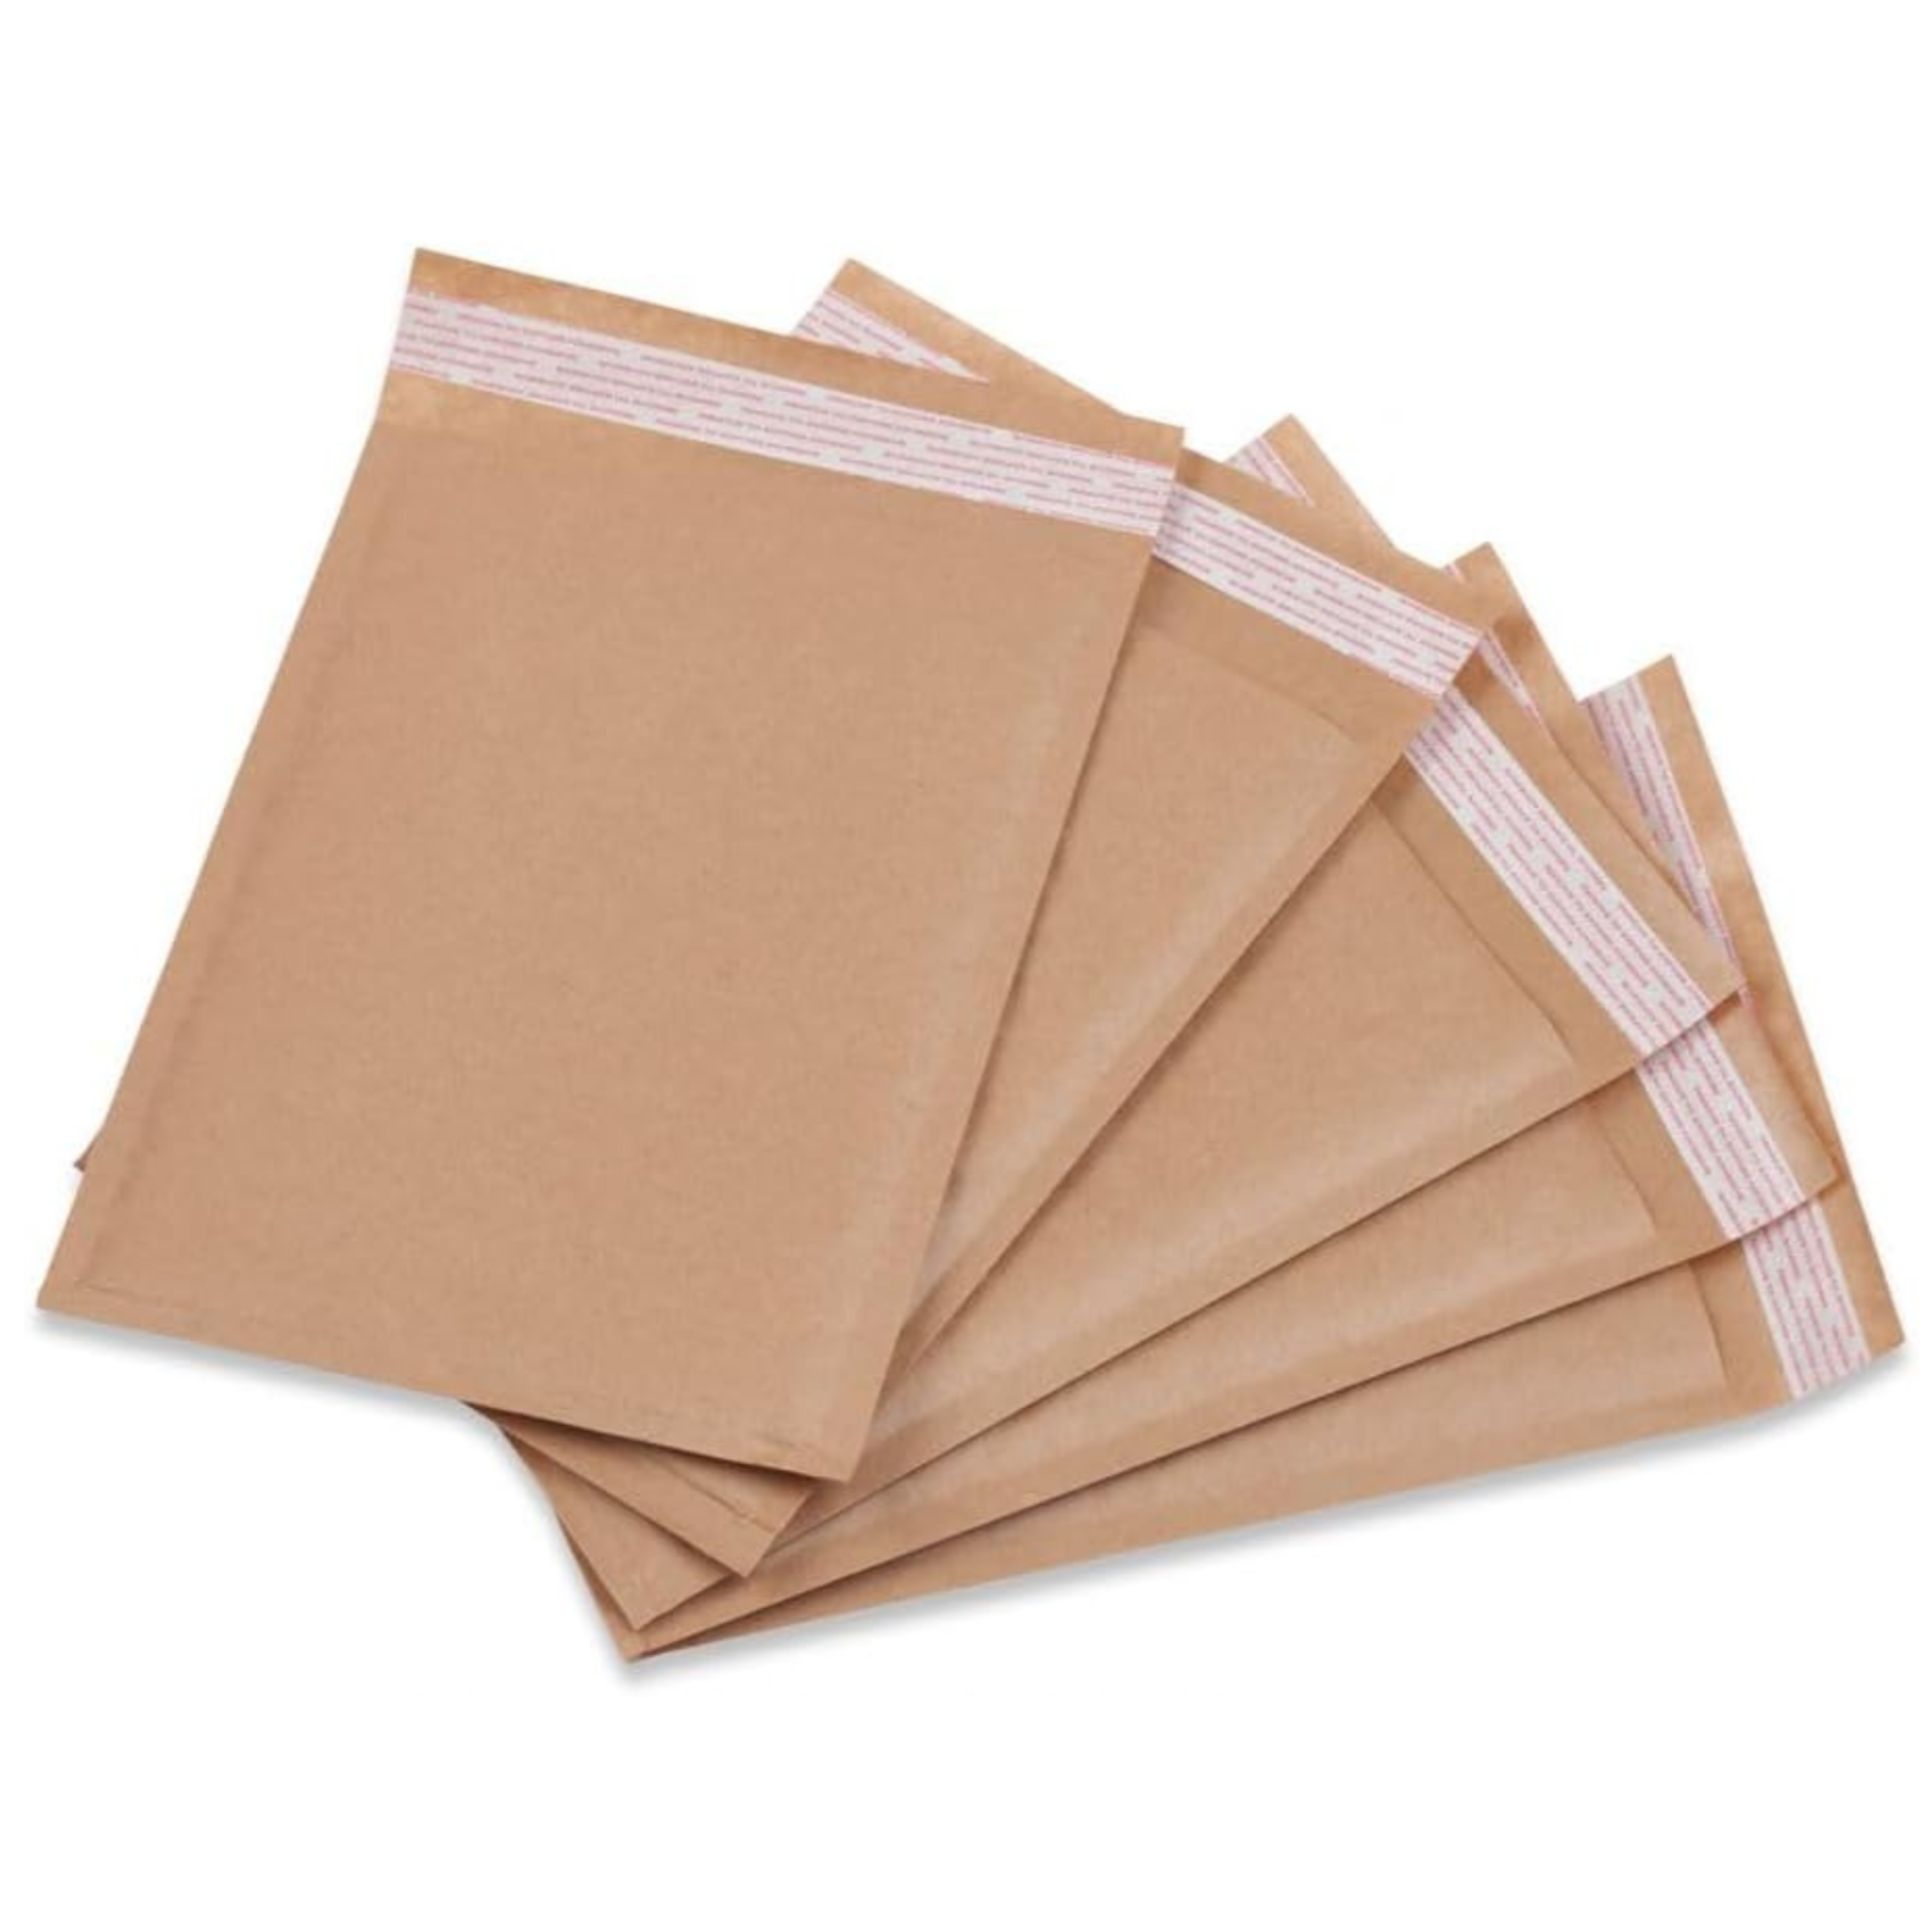 10 BOXES OF PAPER BAG ENVELOPES BUBBLE BAGS 100 PACK PEEL AND SEAL TOUGH LIGHT PADDED (170 X 210MM)